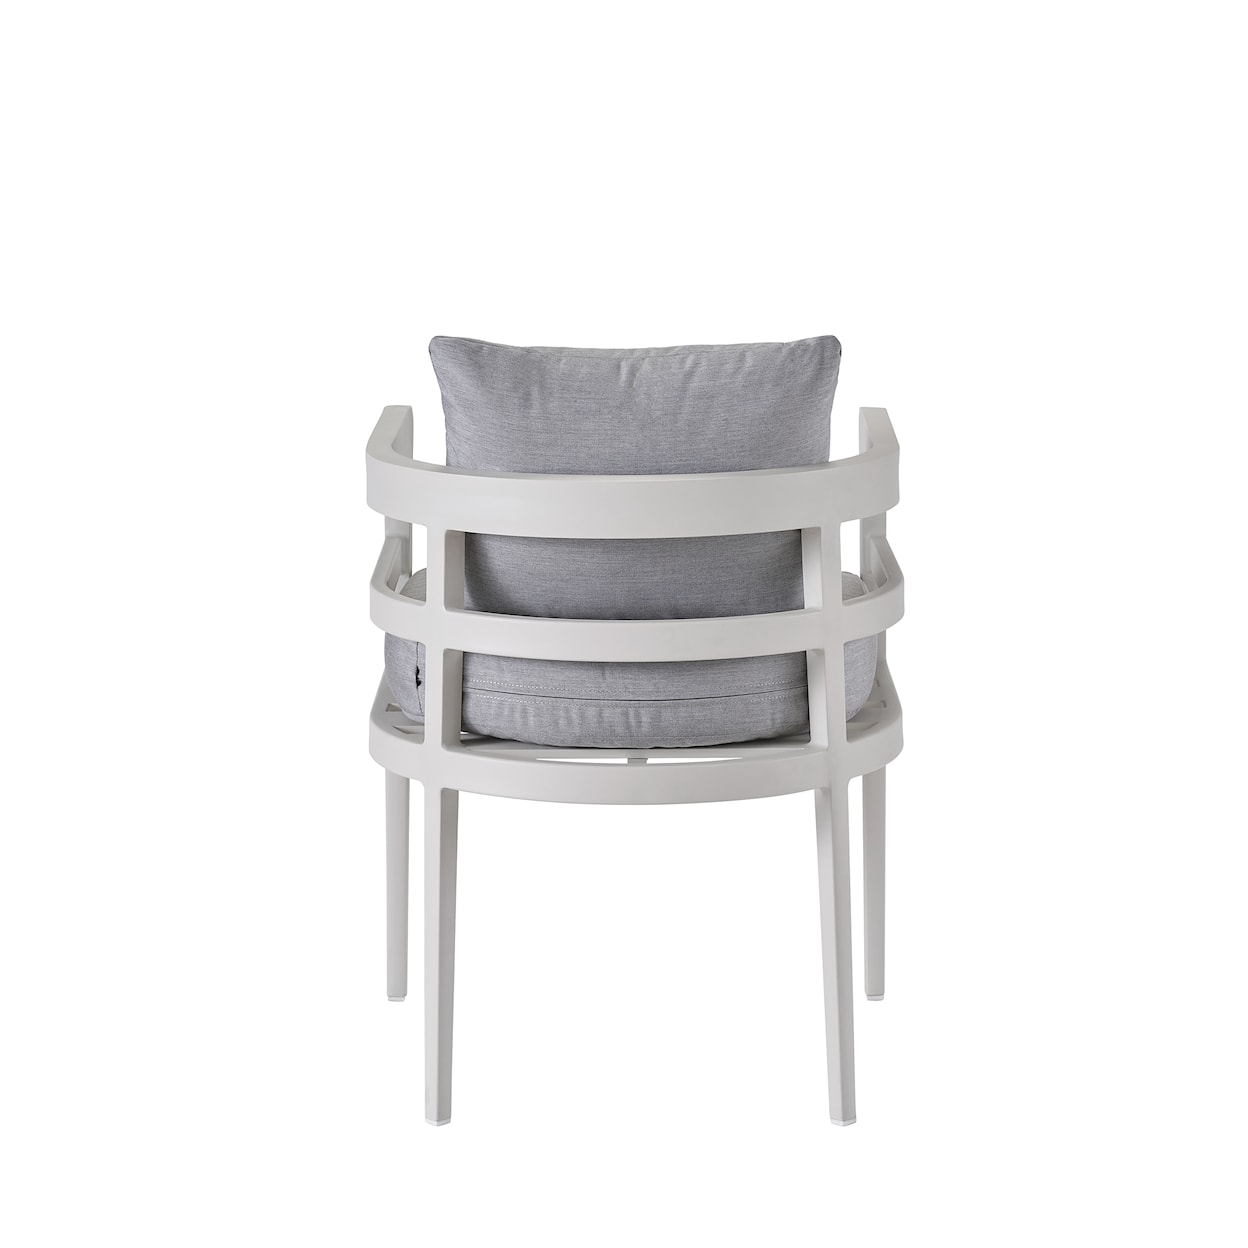 Universal Coastal Living Outdoor Outdoor South Beach Dining Chair 